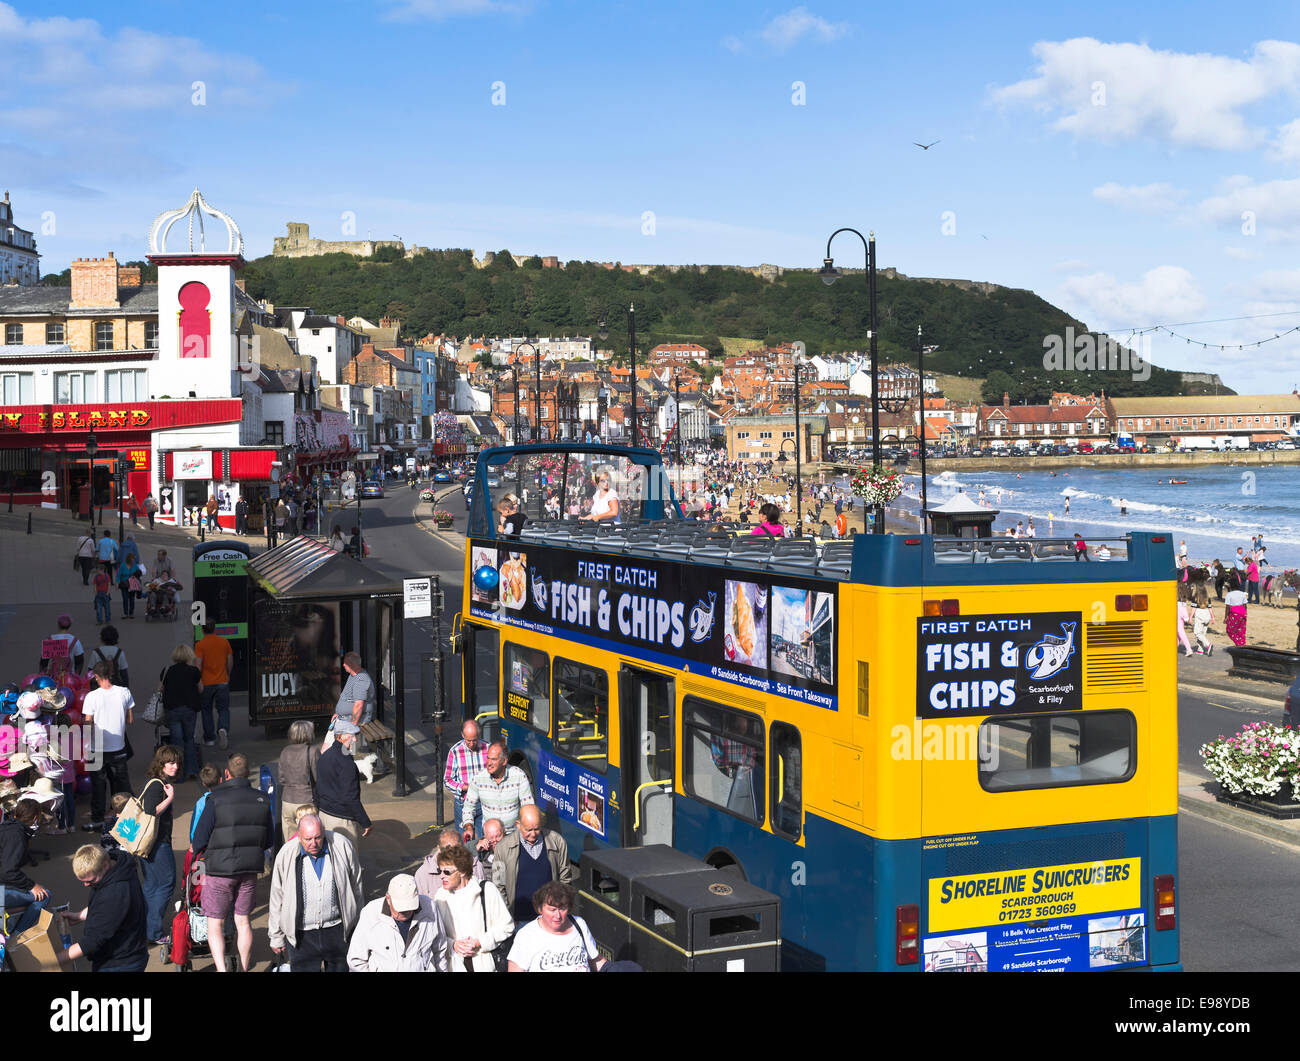 dh South Bay promenade uk SCARBOROUGH NORTH YORKSHIRE Open top bus tourists sea front uk resort people seaside day out seafront england Stock Photo